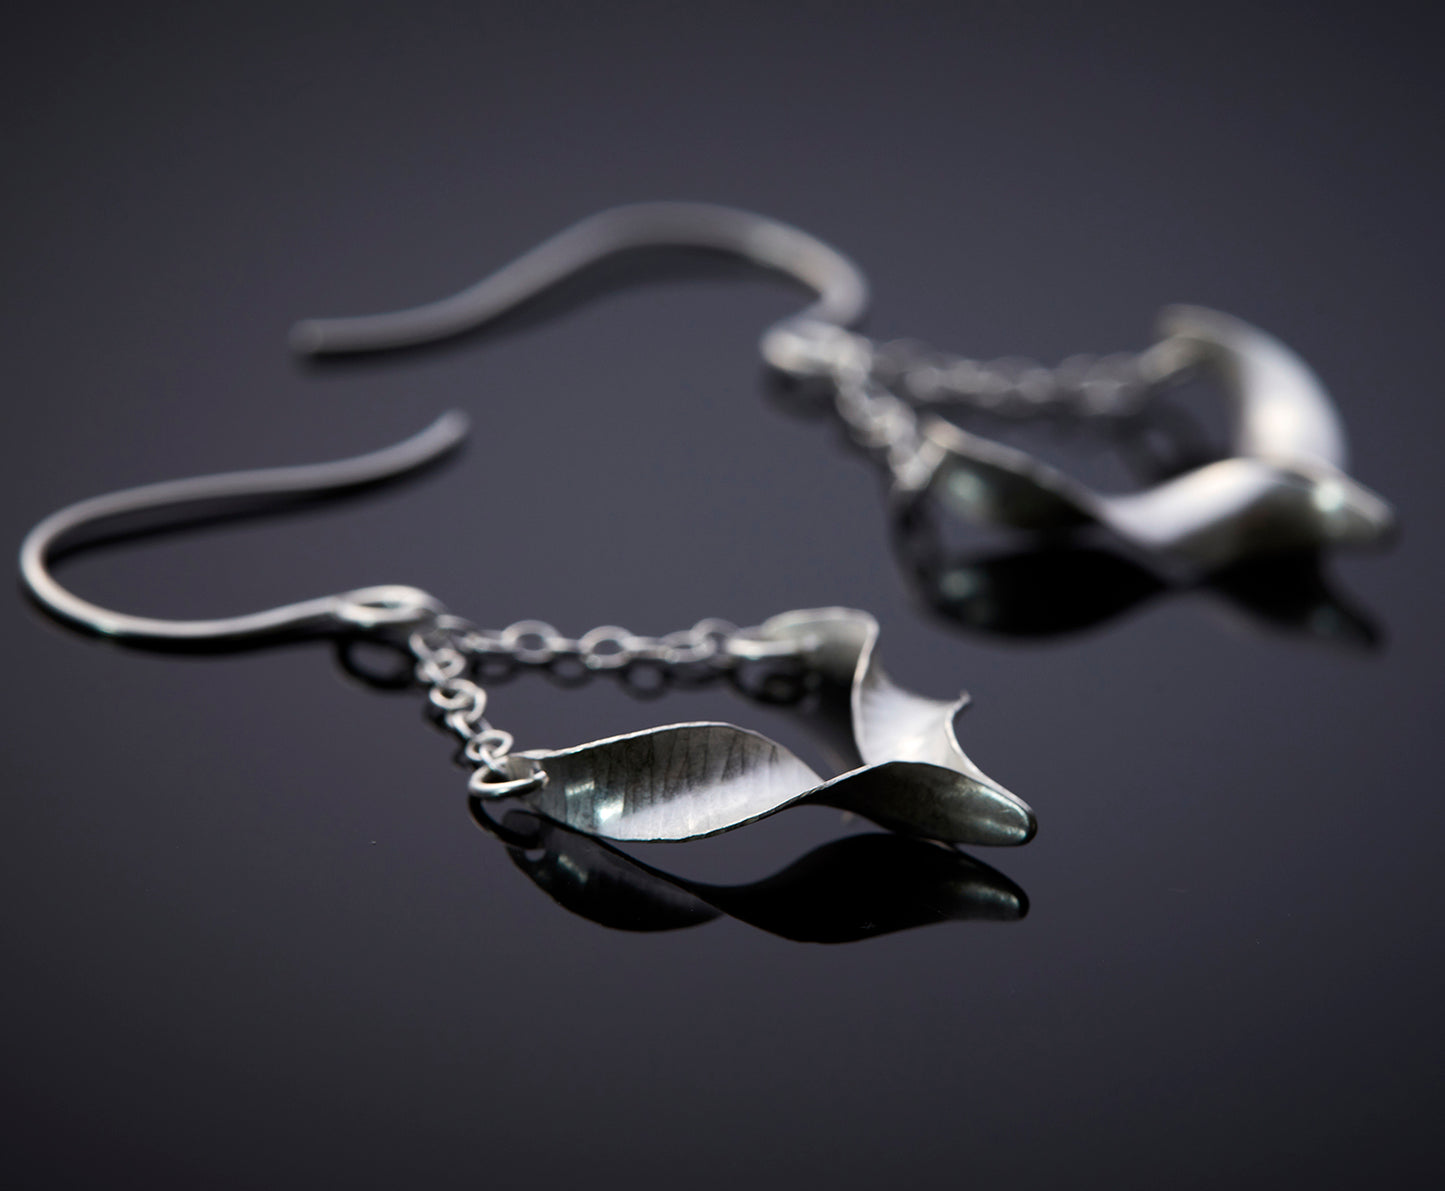 A pair of sculptural silver bird earrings. Each is composed of two twists of hammered silver joined at the central point and hanging from a handmade hook by means of delicate trace chain. They have a hammered texture, non-reflective finish and burnished edges. Shown lying at an angle so that the twist is emphasised and the central join displayed.